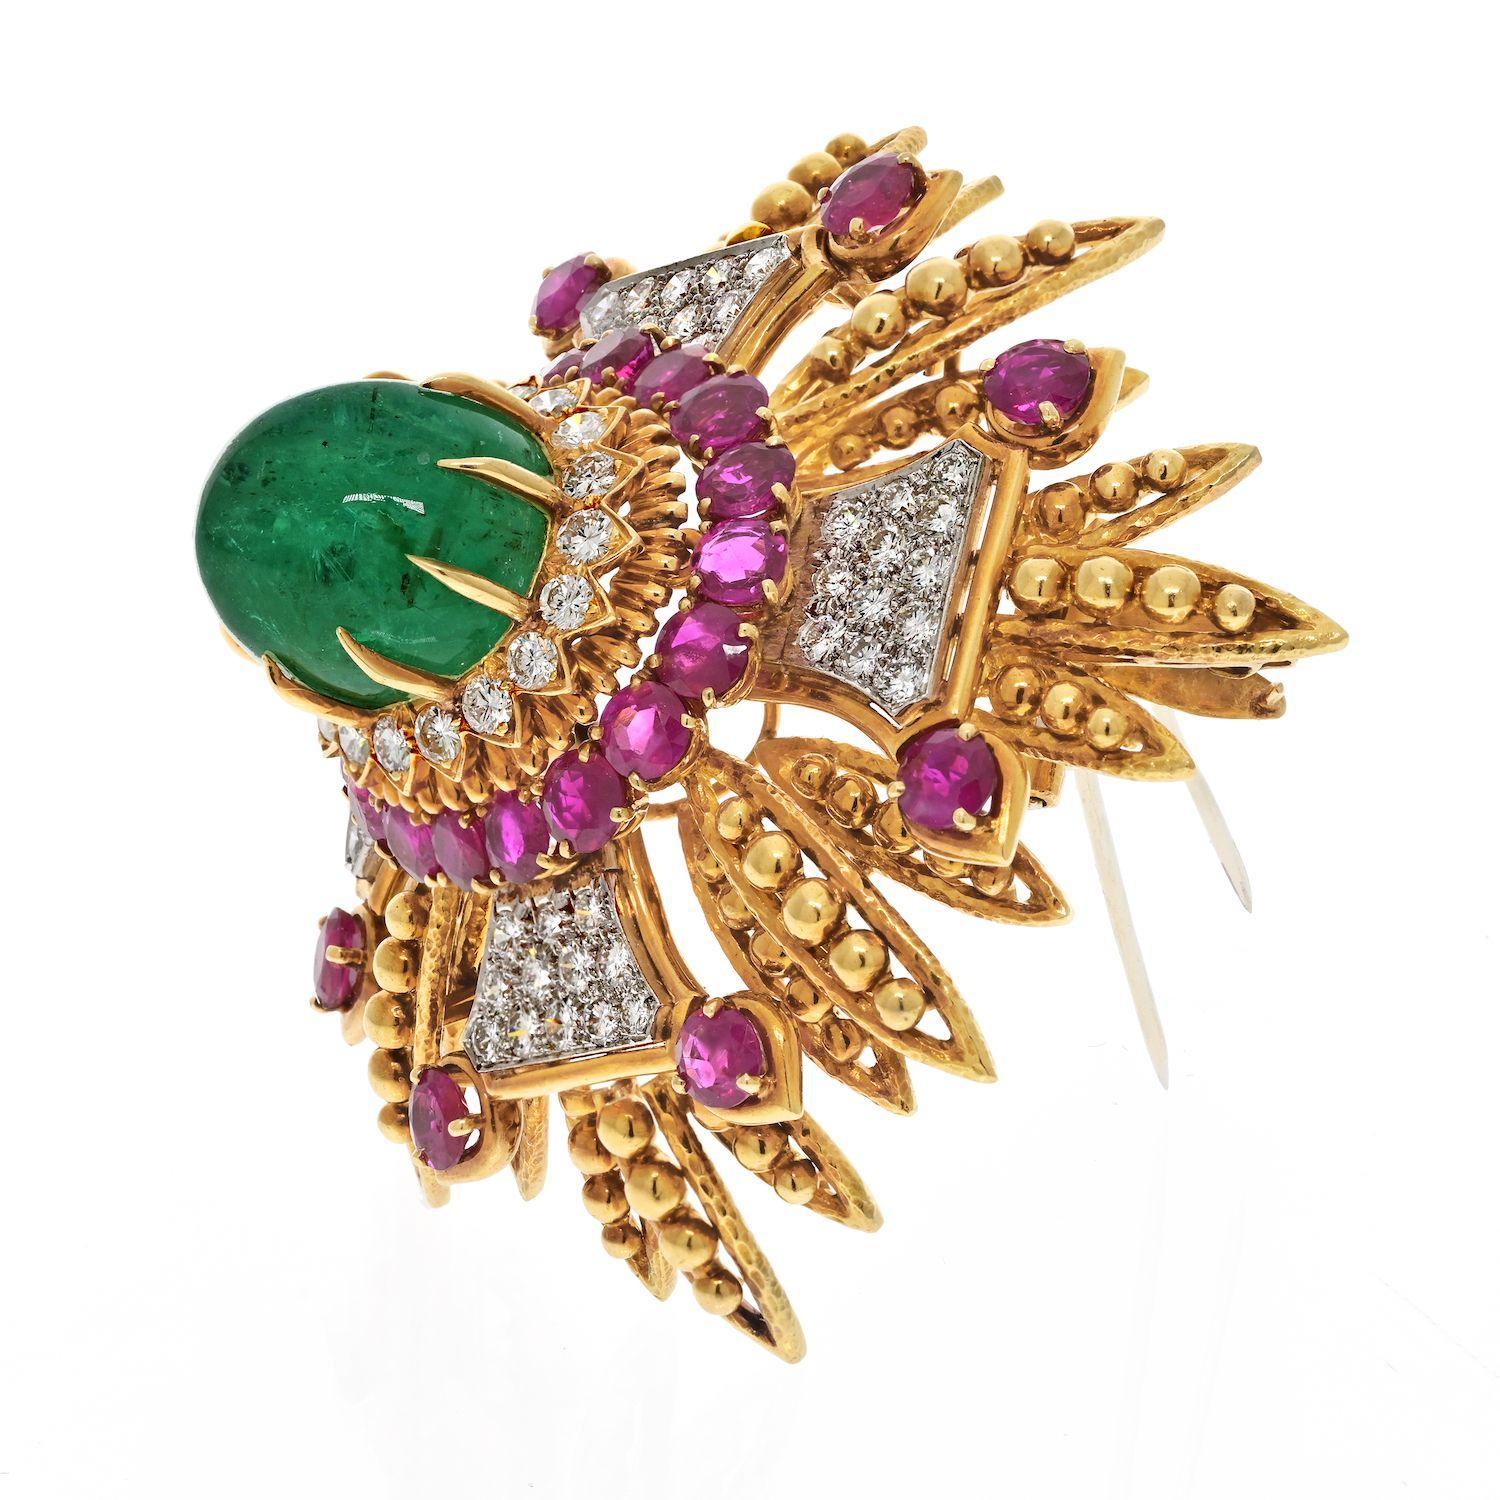 Cabochon David Webb Platinum & 18K Yellow Gold 1960's Green Emerald, Rubies, And Diamonds For Sale